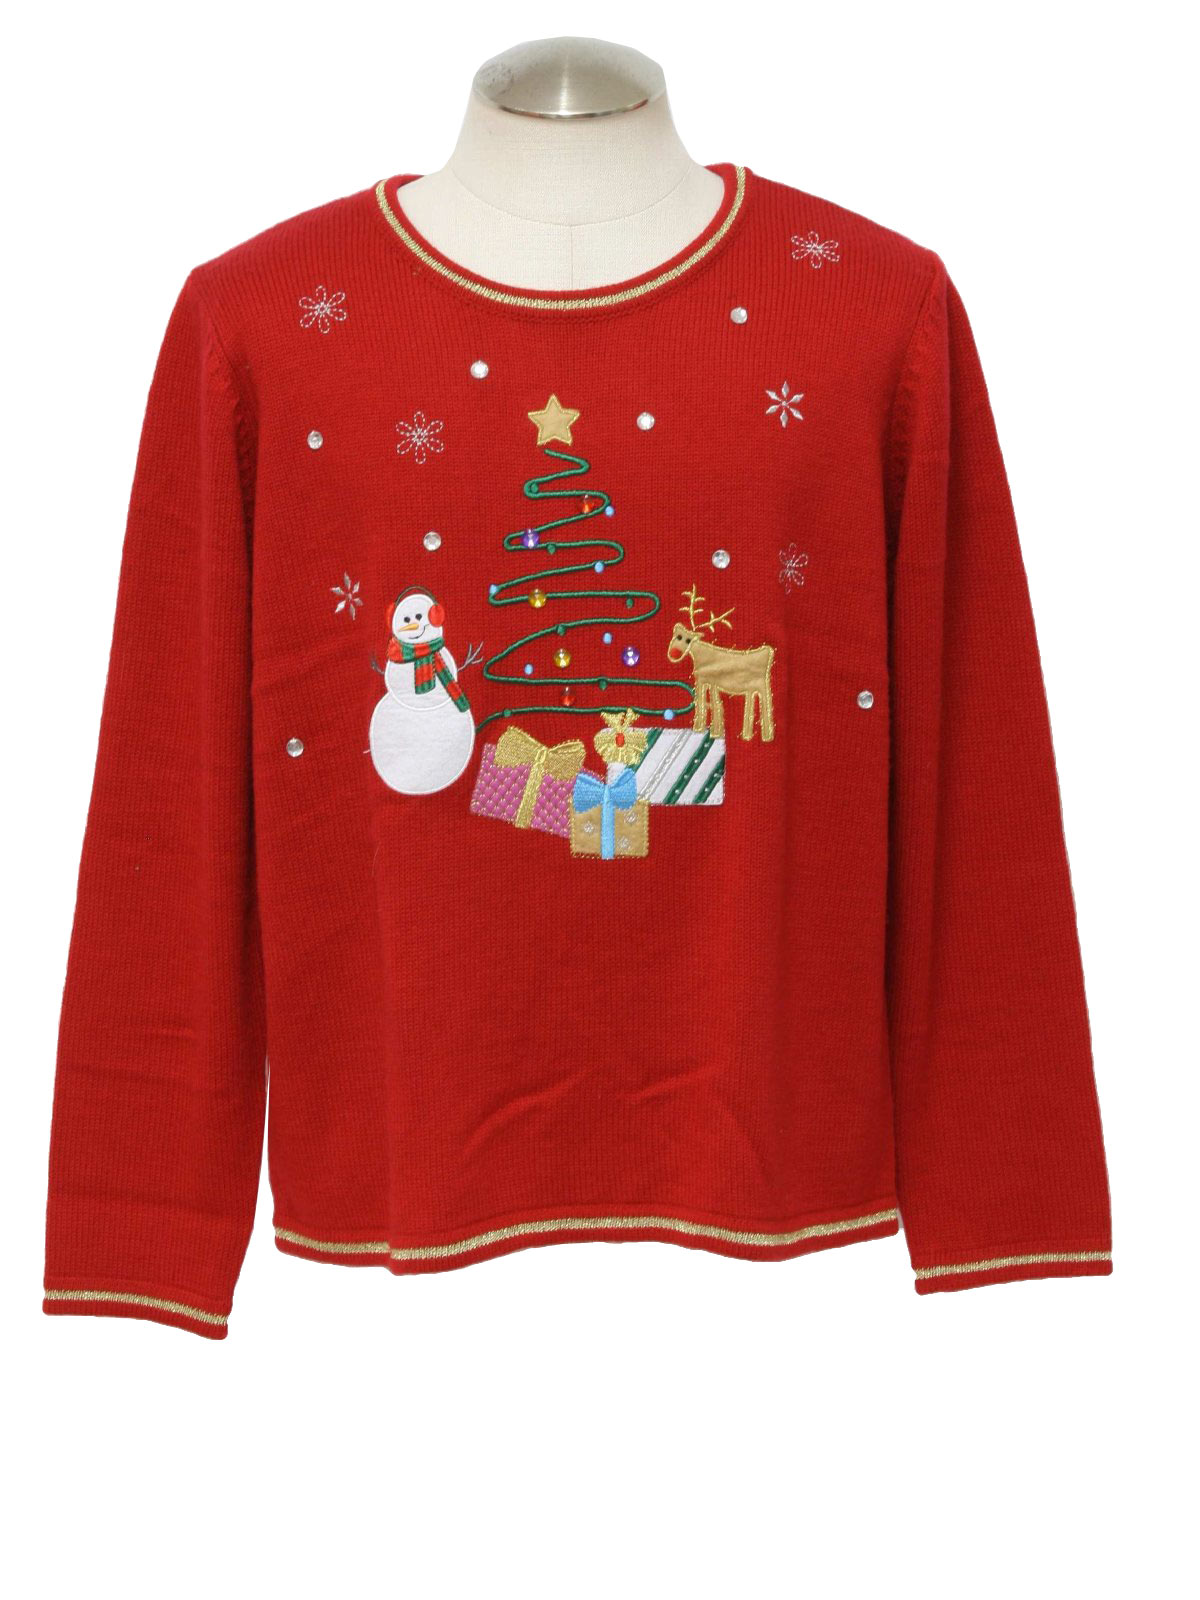 Ugly Christmas Sweater: -Care Label Only- Unisex red, white, tan and ...